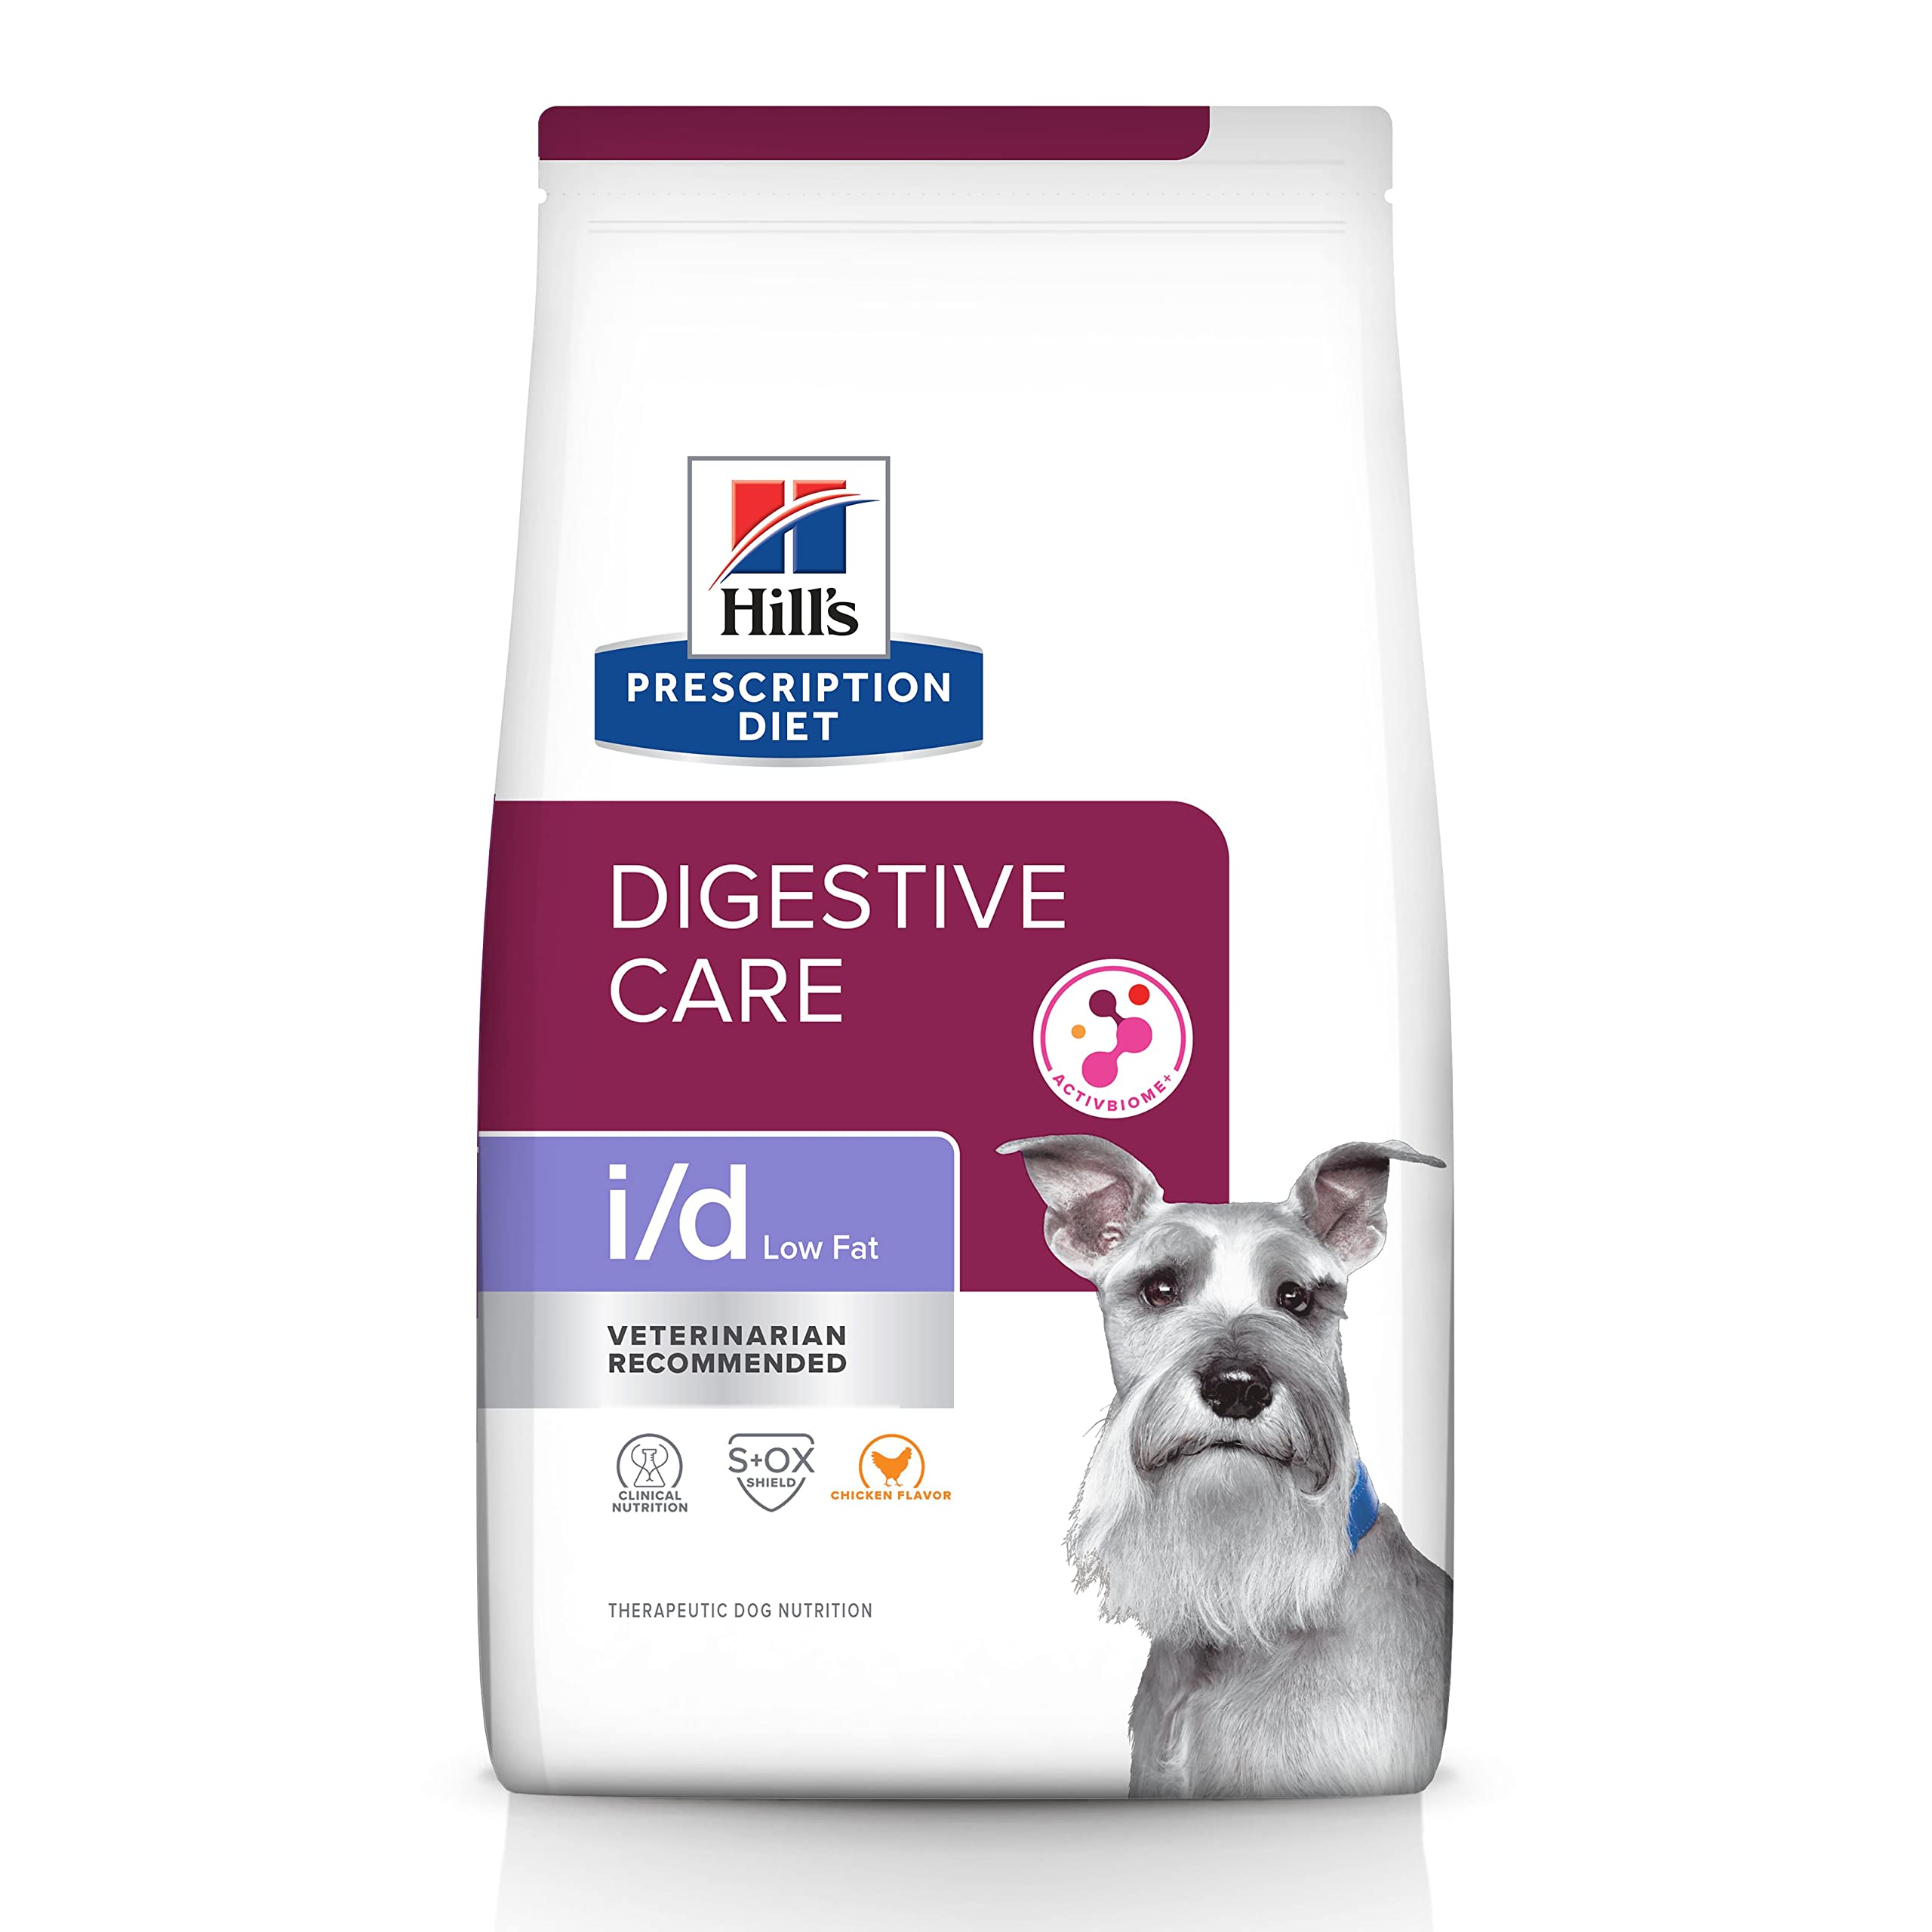 HILL'S PRESCRIPTION DIET i/d Low Fat Digestive Care Chicken Flavor Dry Dog Food, Veterinary Diet